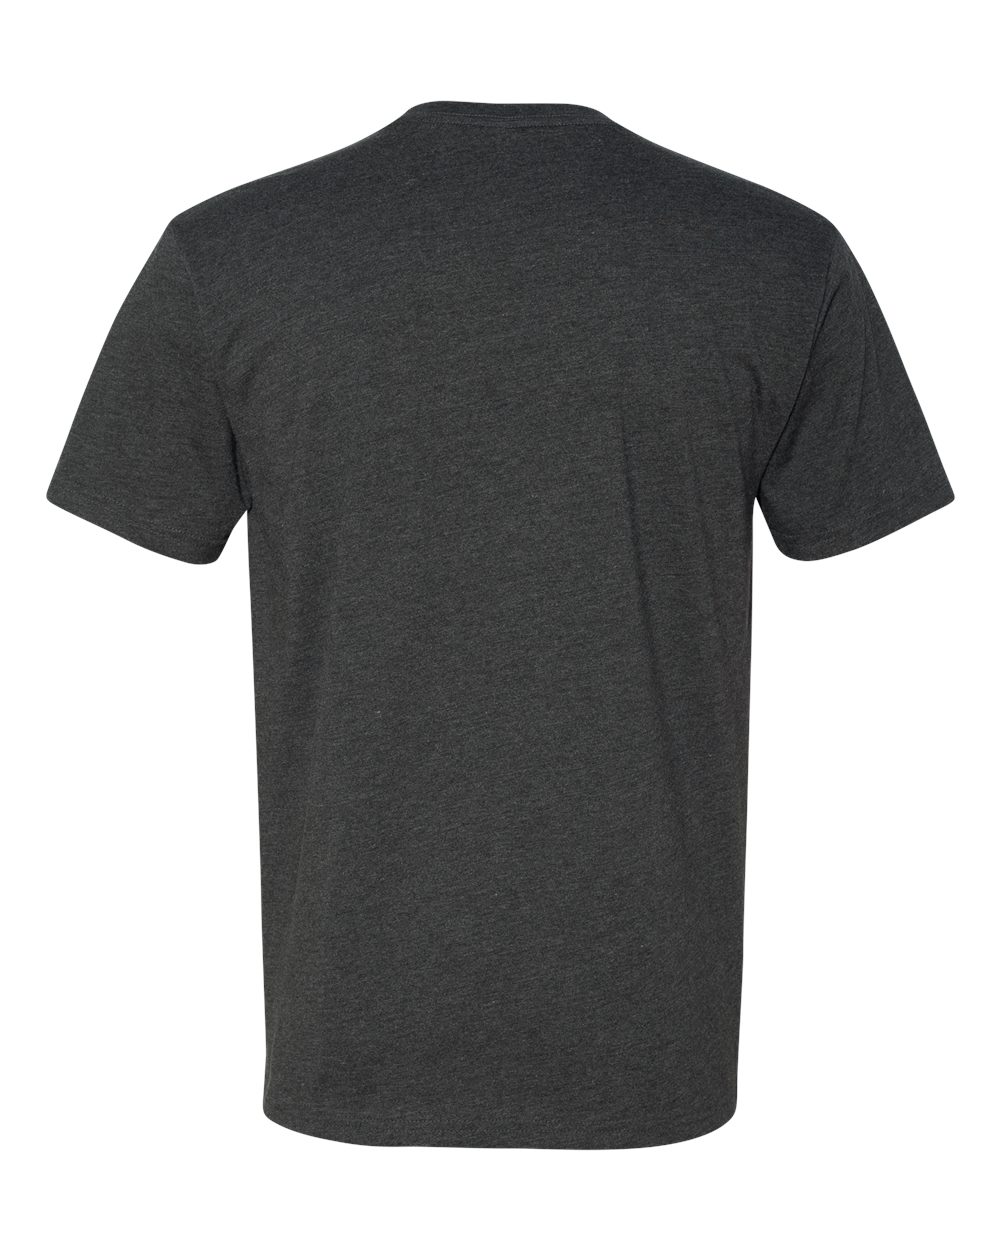 Back of Charcoal colored Nudge Printing T Shirt